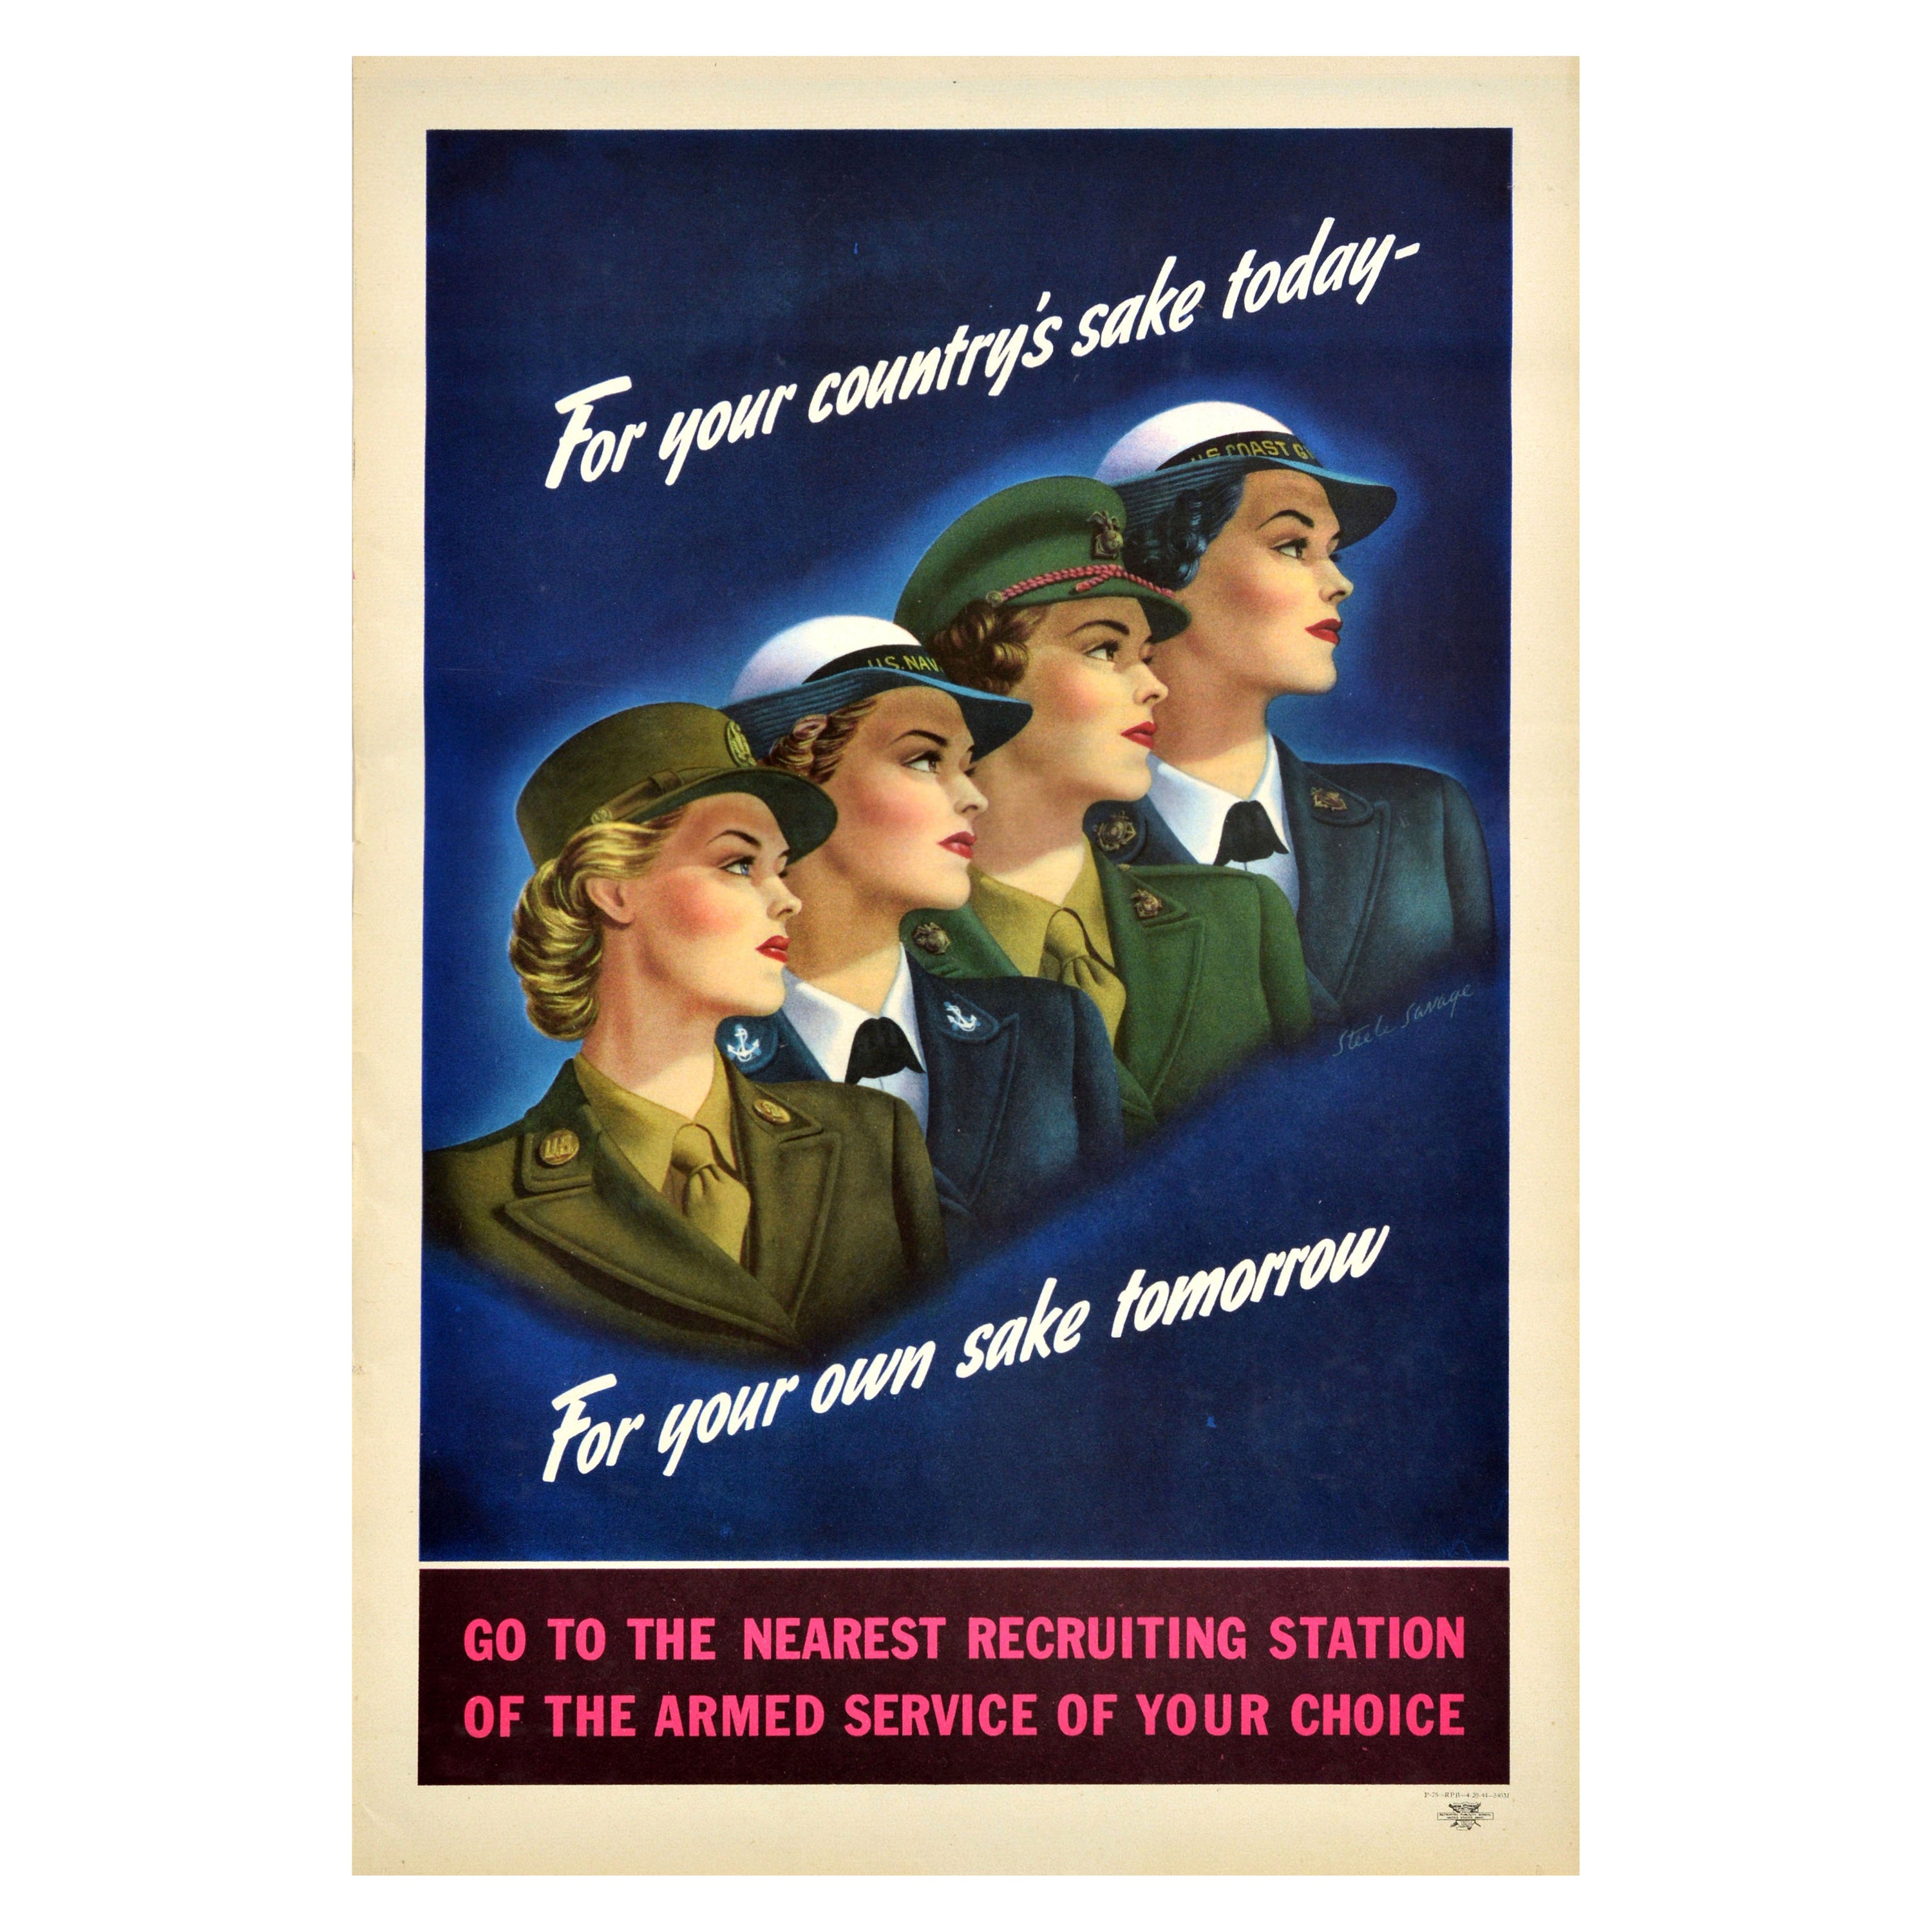 Original Vintage American WWII Recruitment Poster For Your Country's Sake Today For Sale